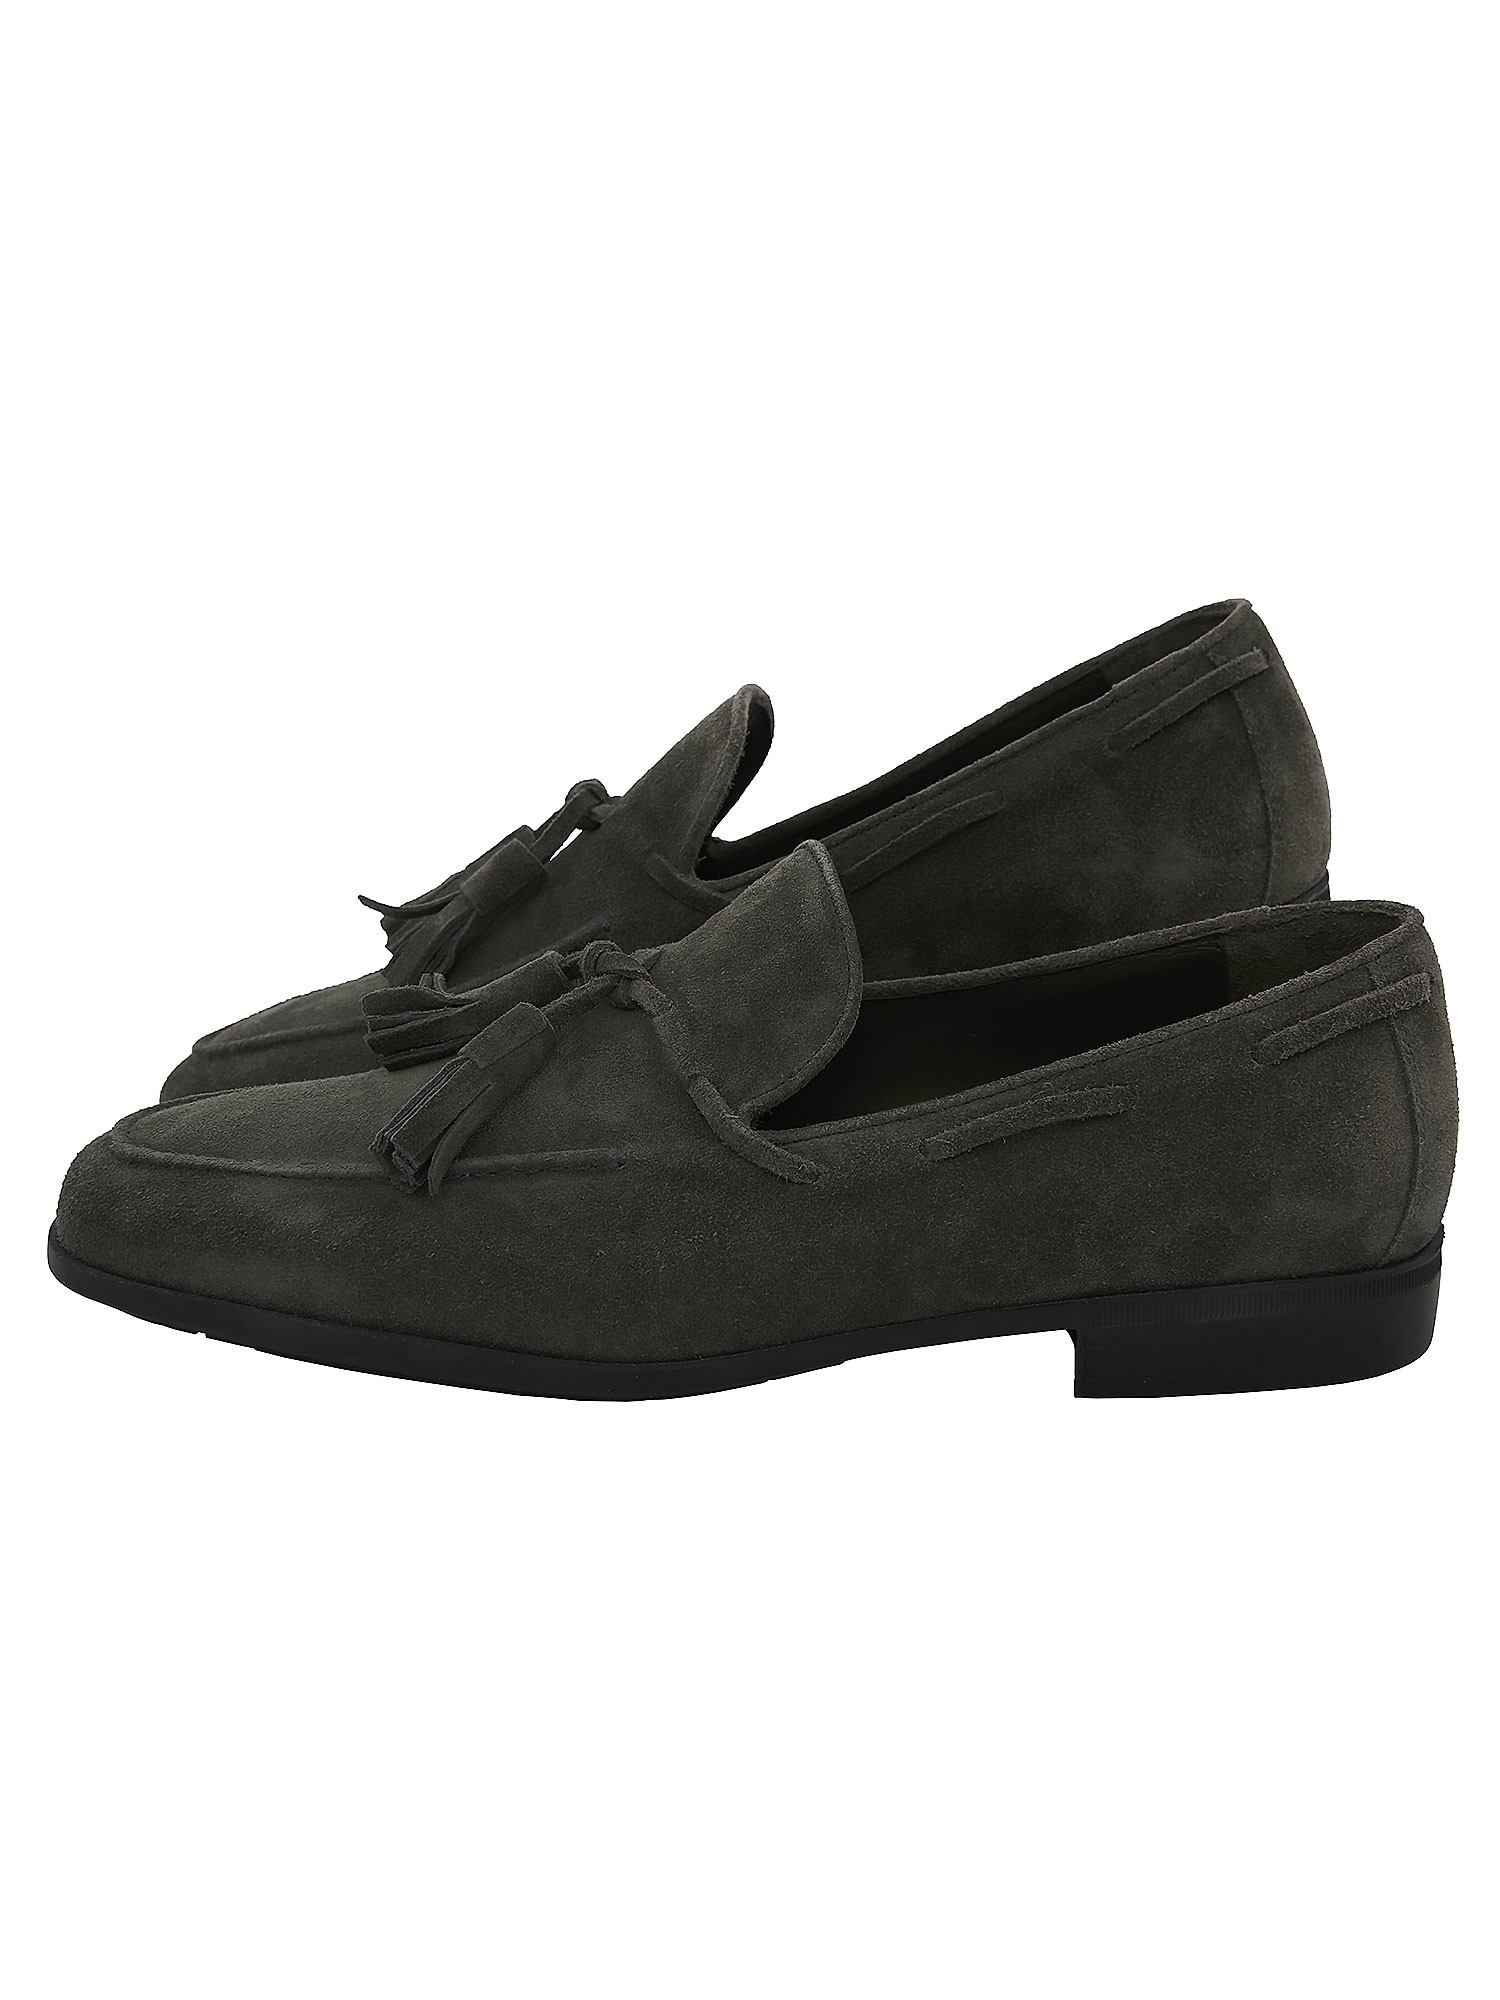 Loafers for men in dark grey suede with tassels J. Holbens